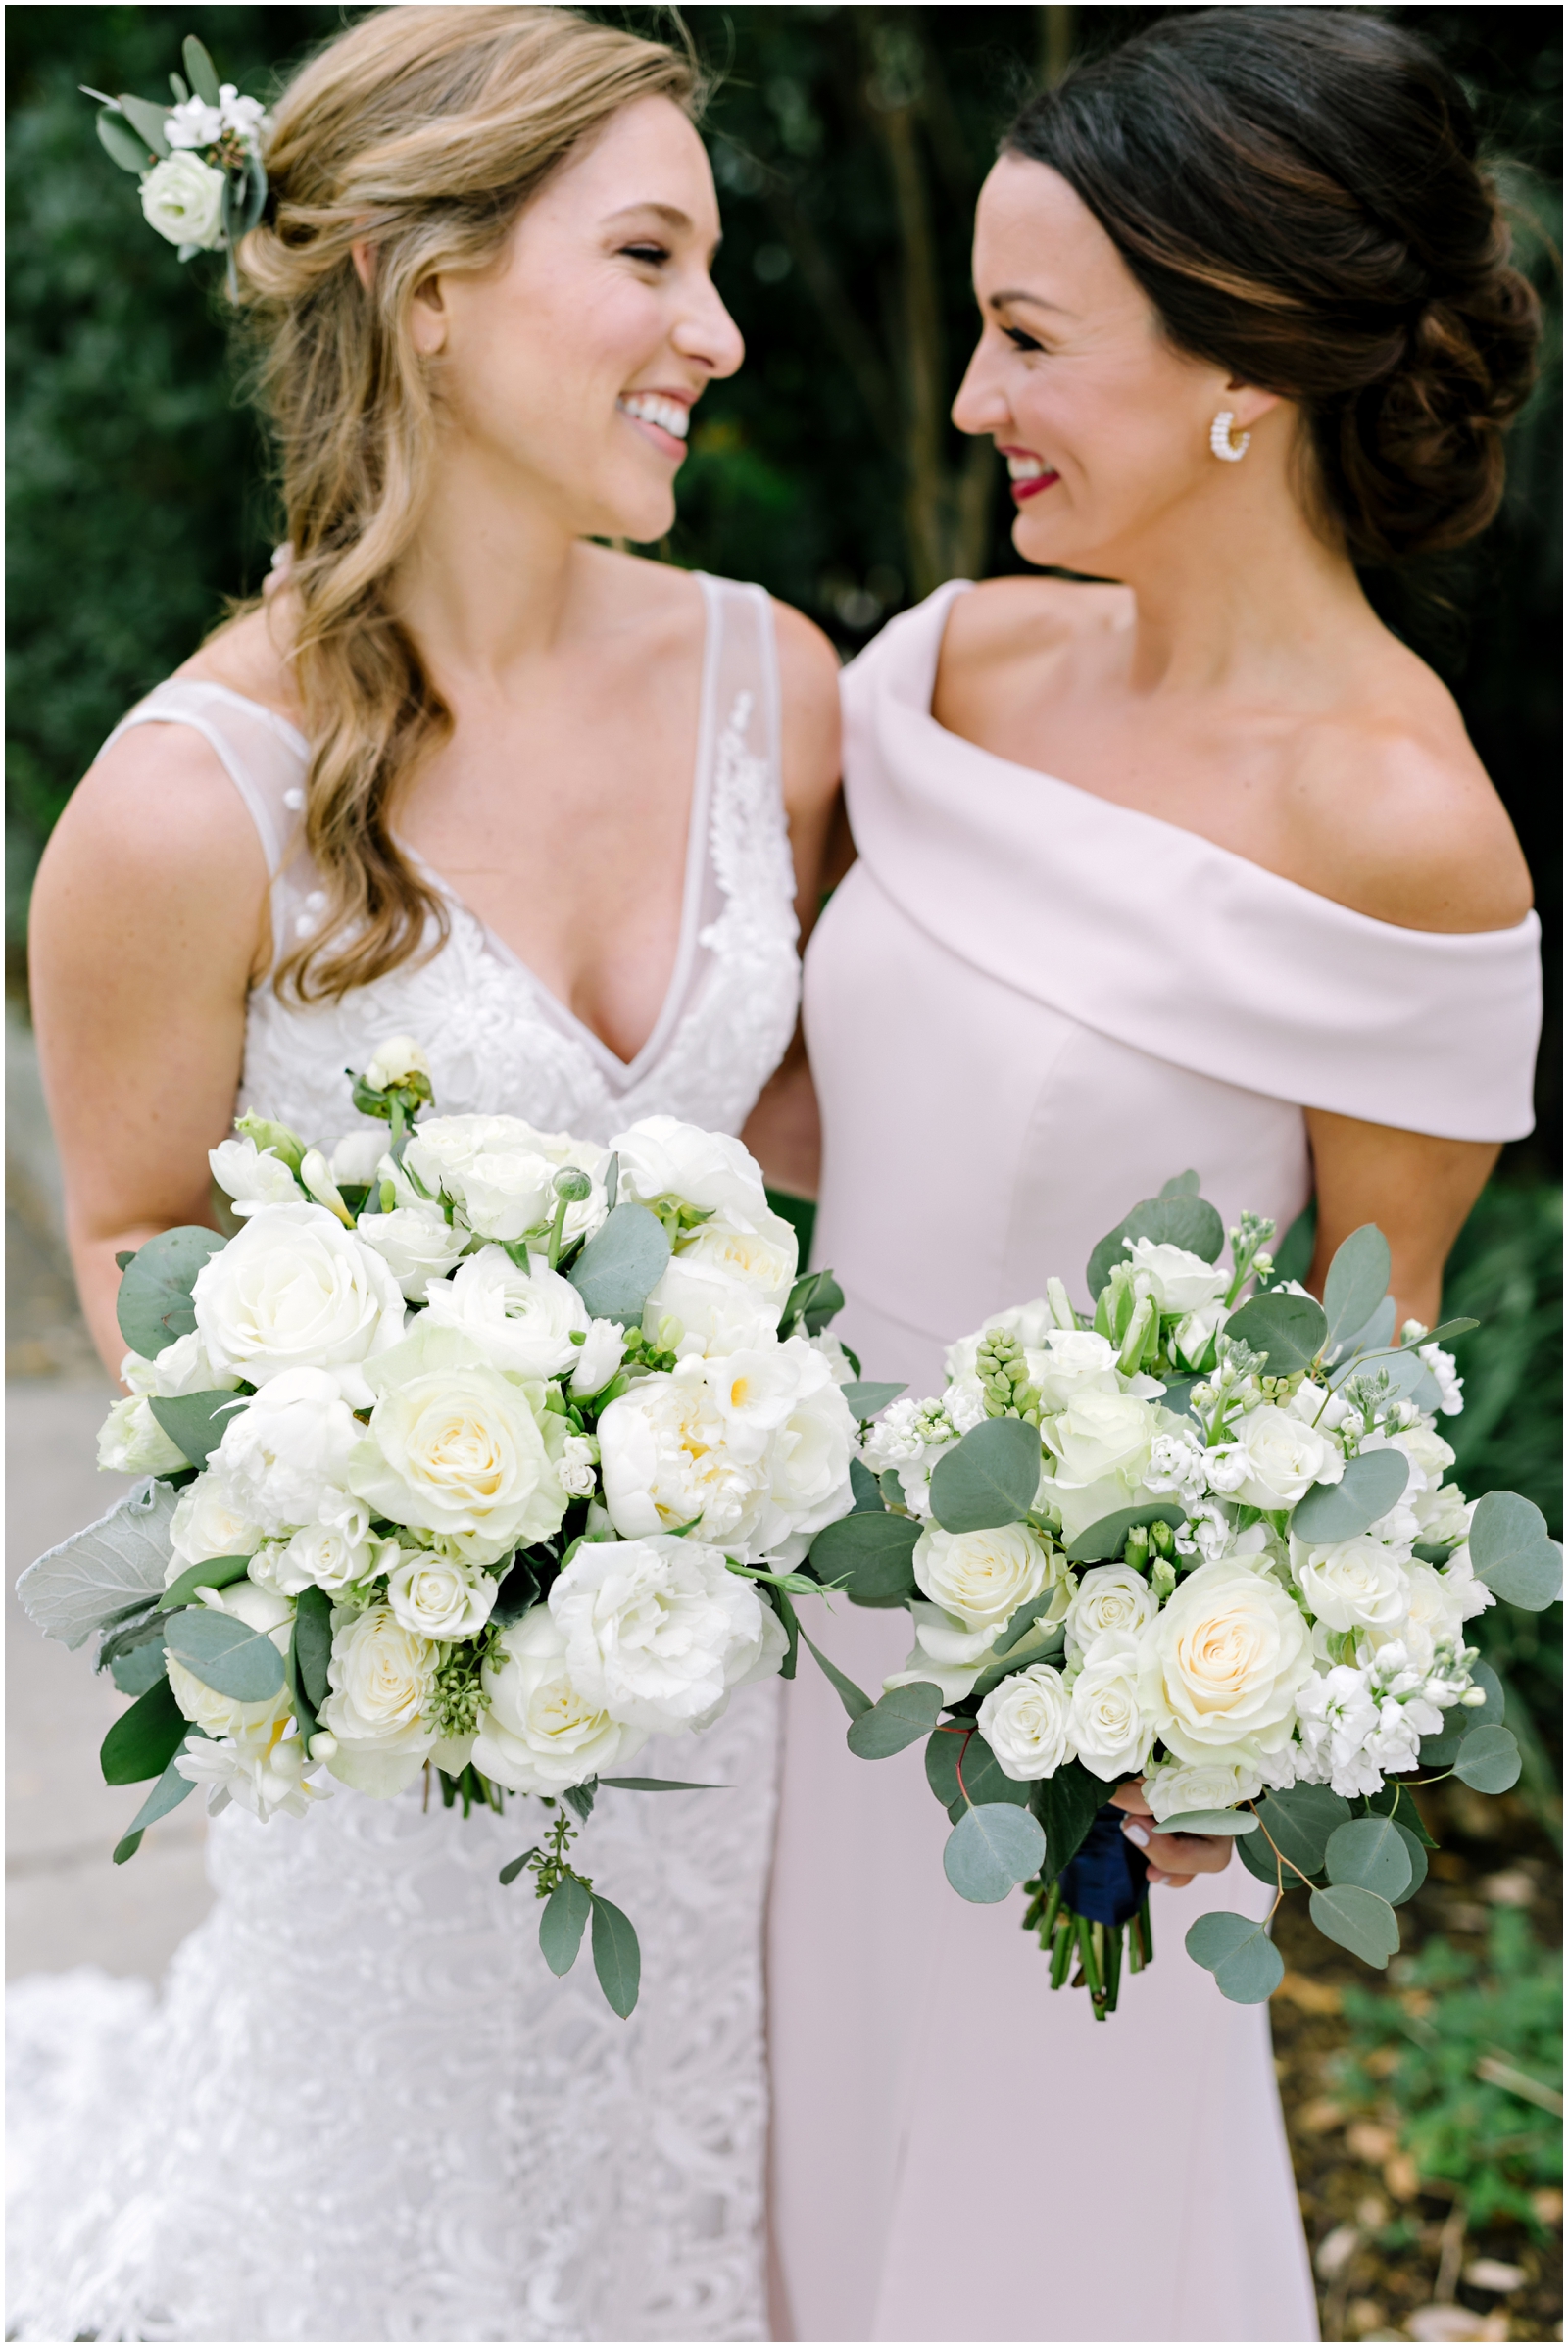  Bride and bridesmaids holding white and greenery wedding bouquet 